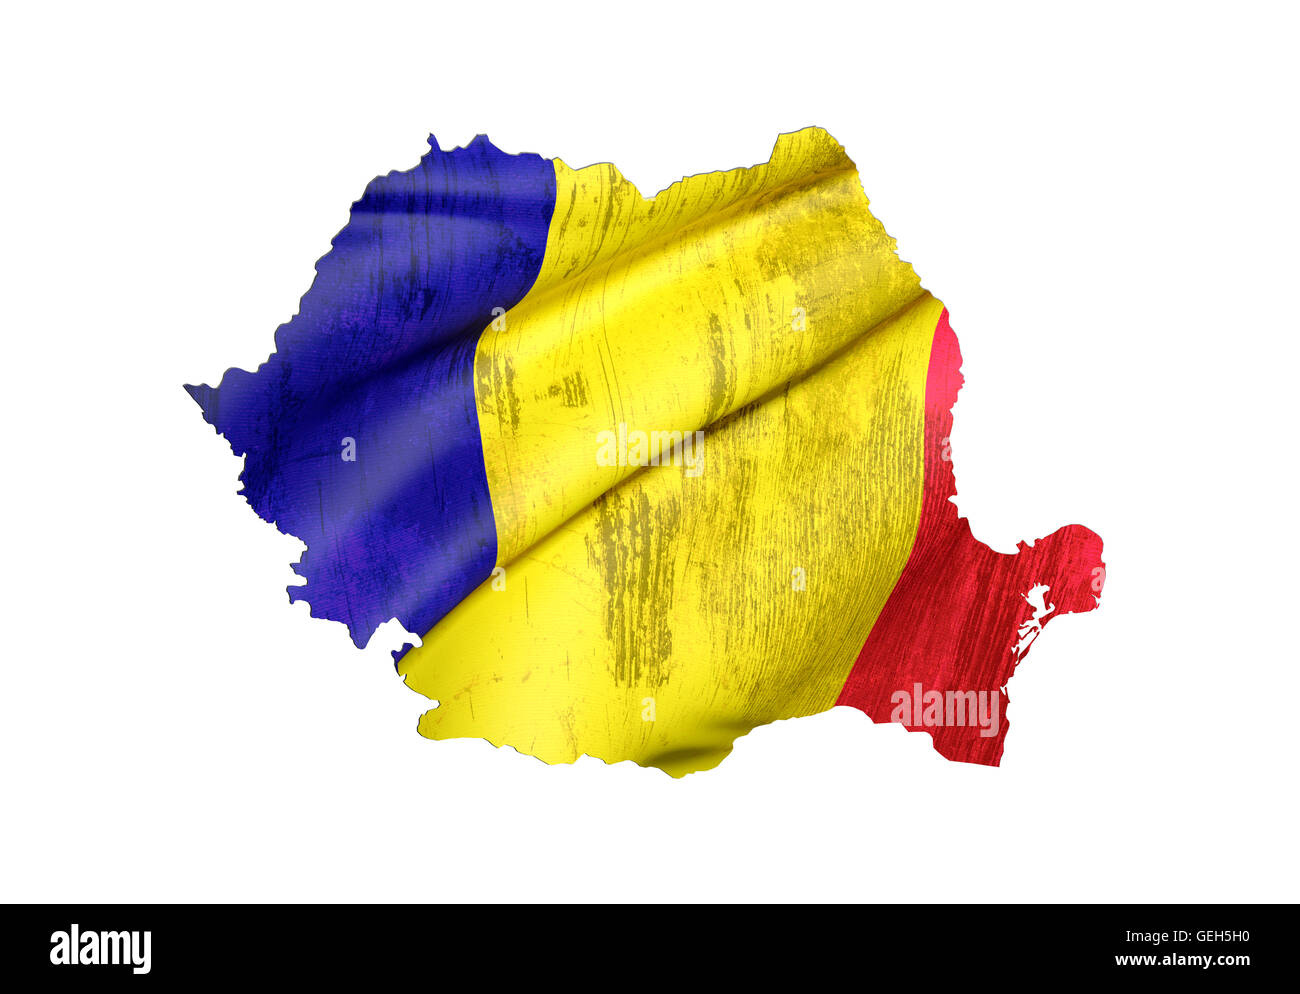 3d rendering of Romania map and flag on white background. Stock Photo